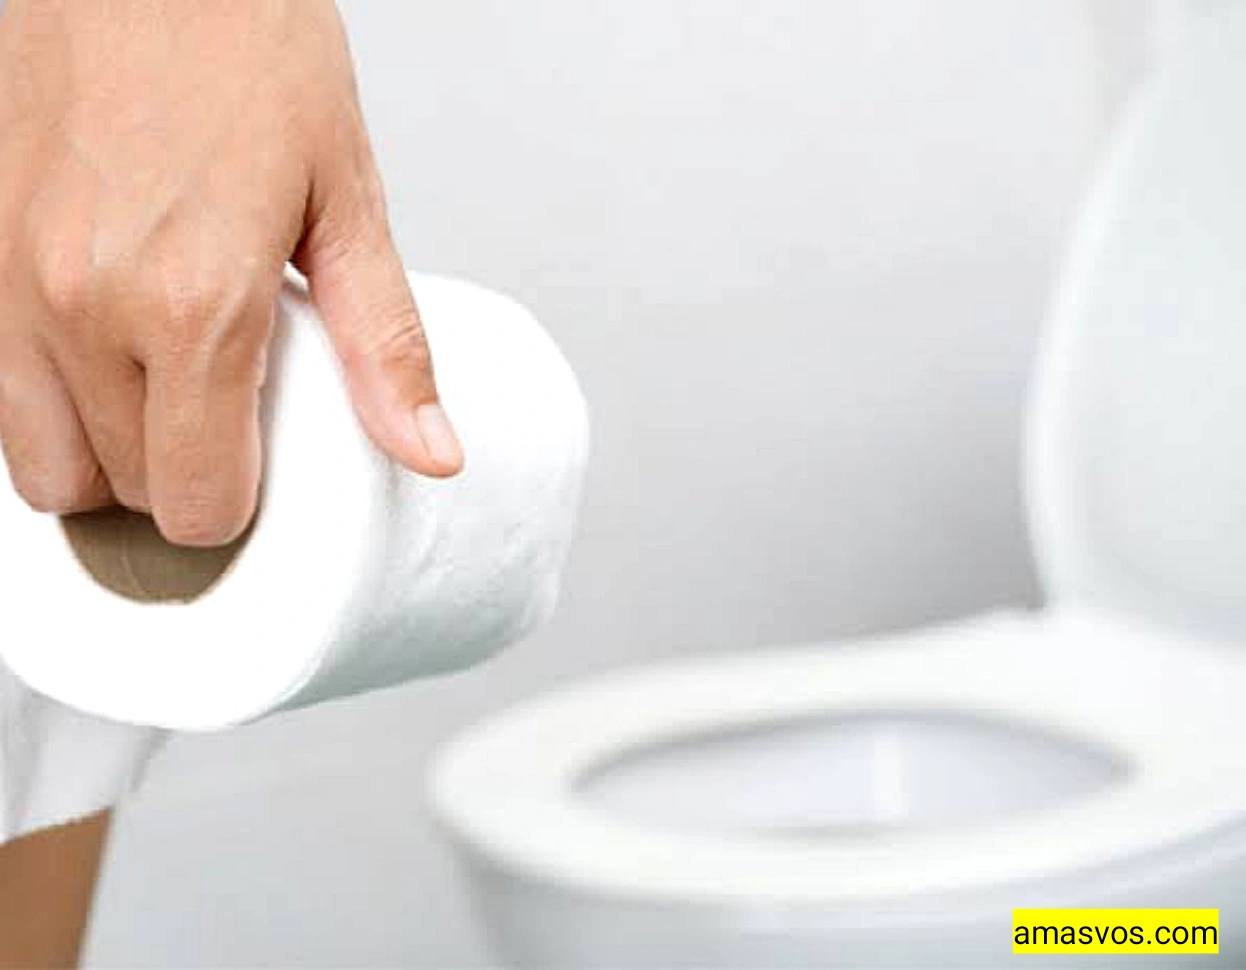 Does Protein Make You Poop?